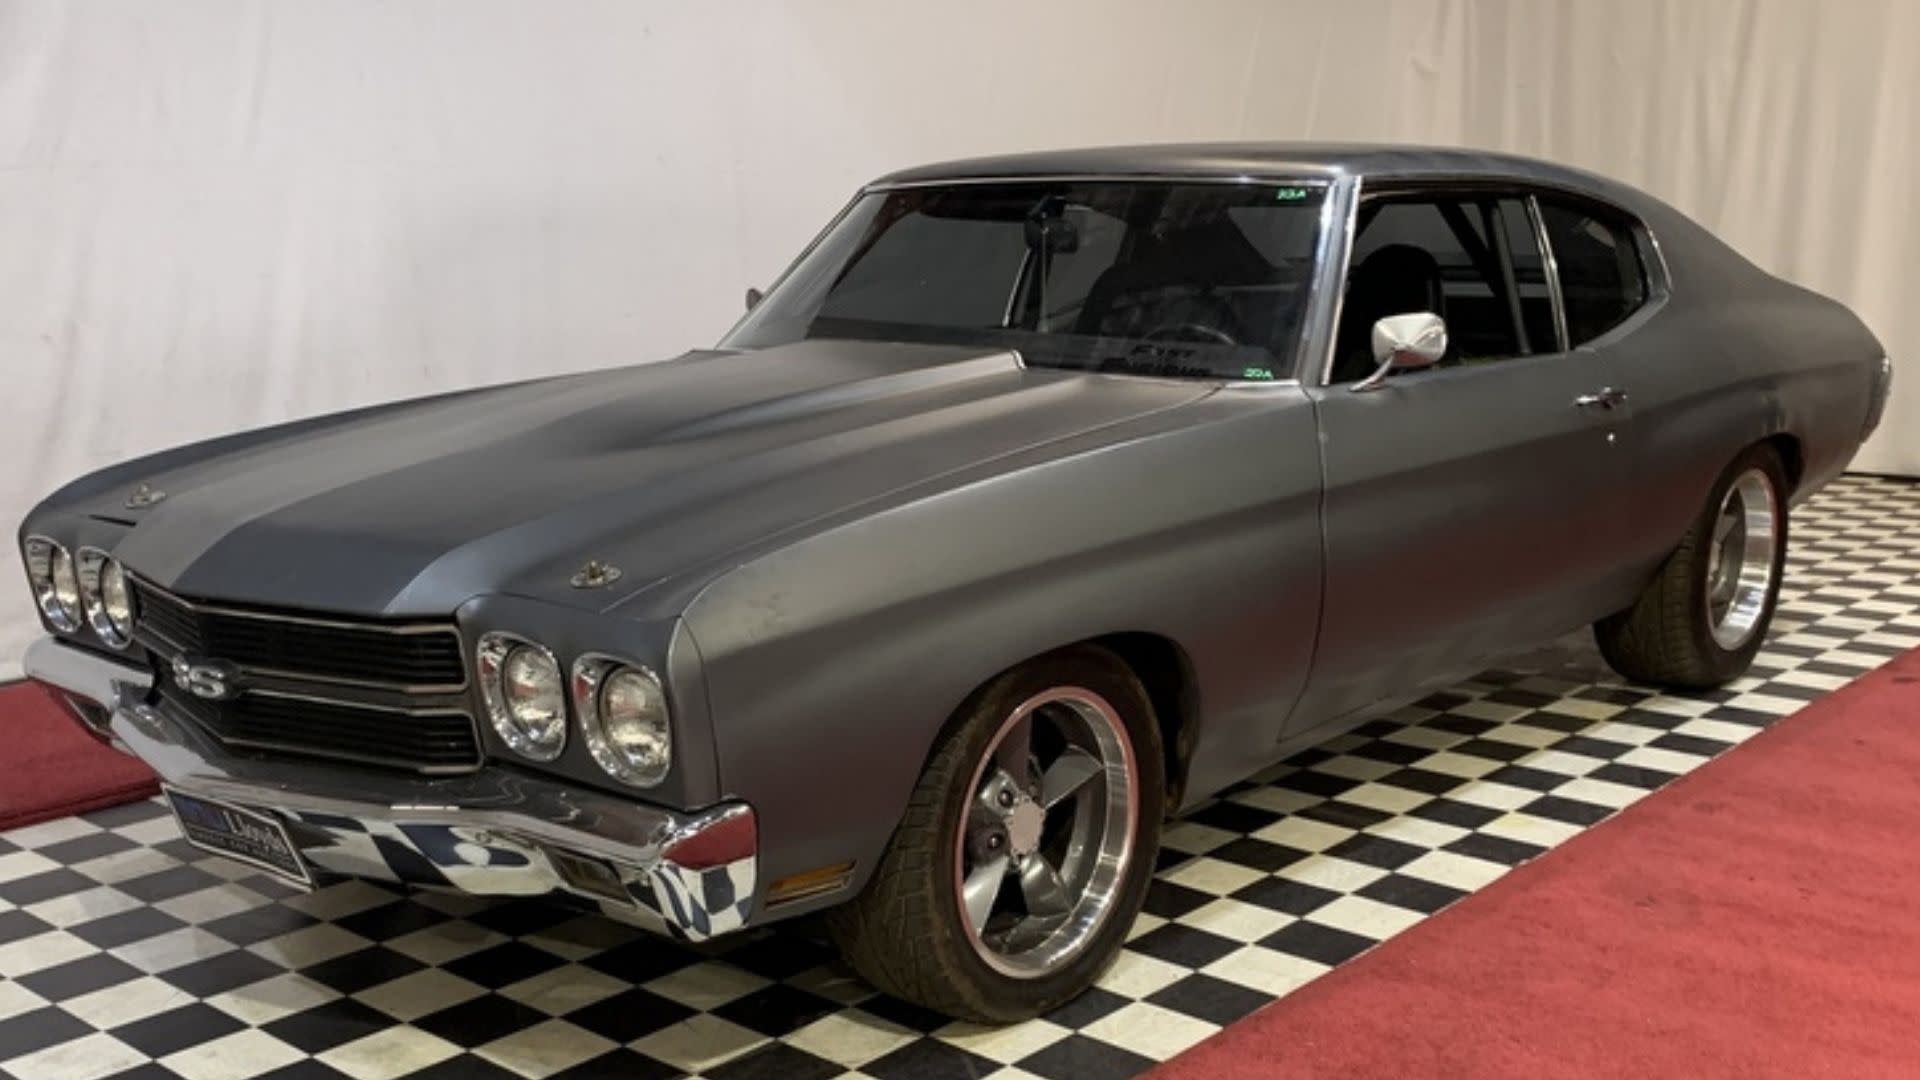 Chevrolet Chevelle fast Furious 4